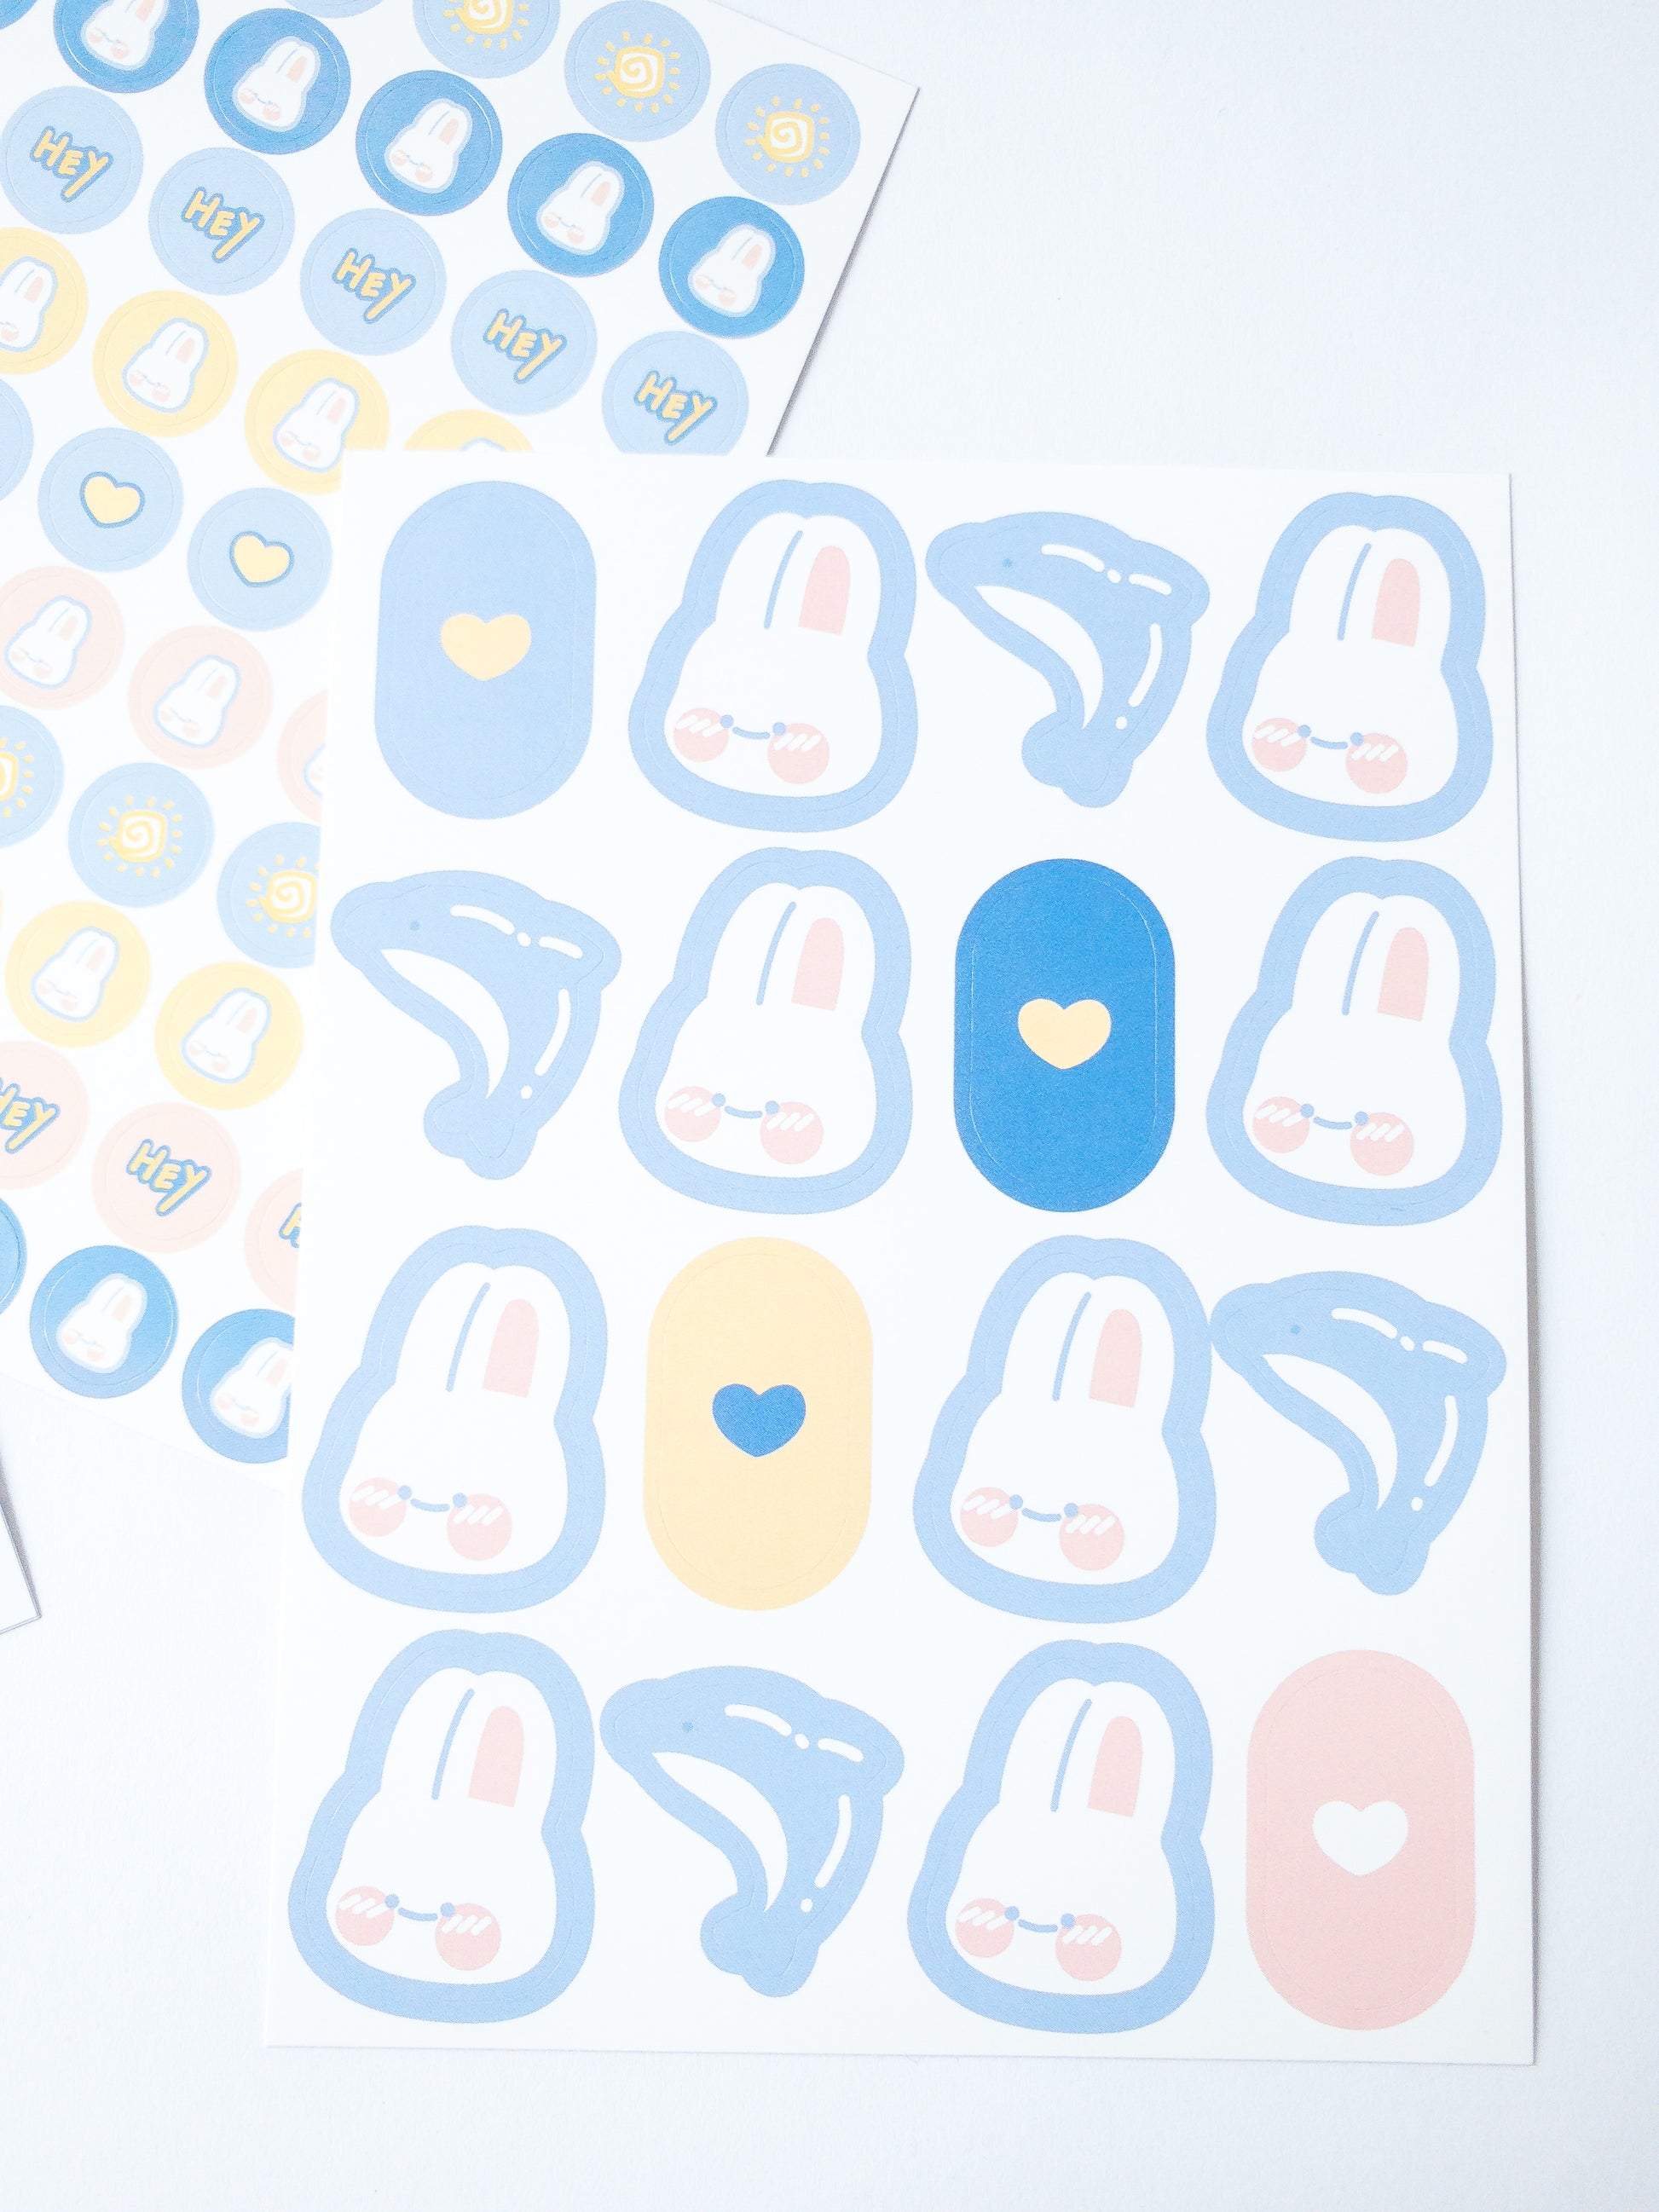 122 Korean style stickers! Three sheets of smiley bunnies and dolphins and more. There are 70 mini stickers, 36 medium-sized stickers and 16 large happy, smiley bunnies, dolphins and hearts.